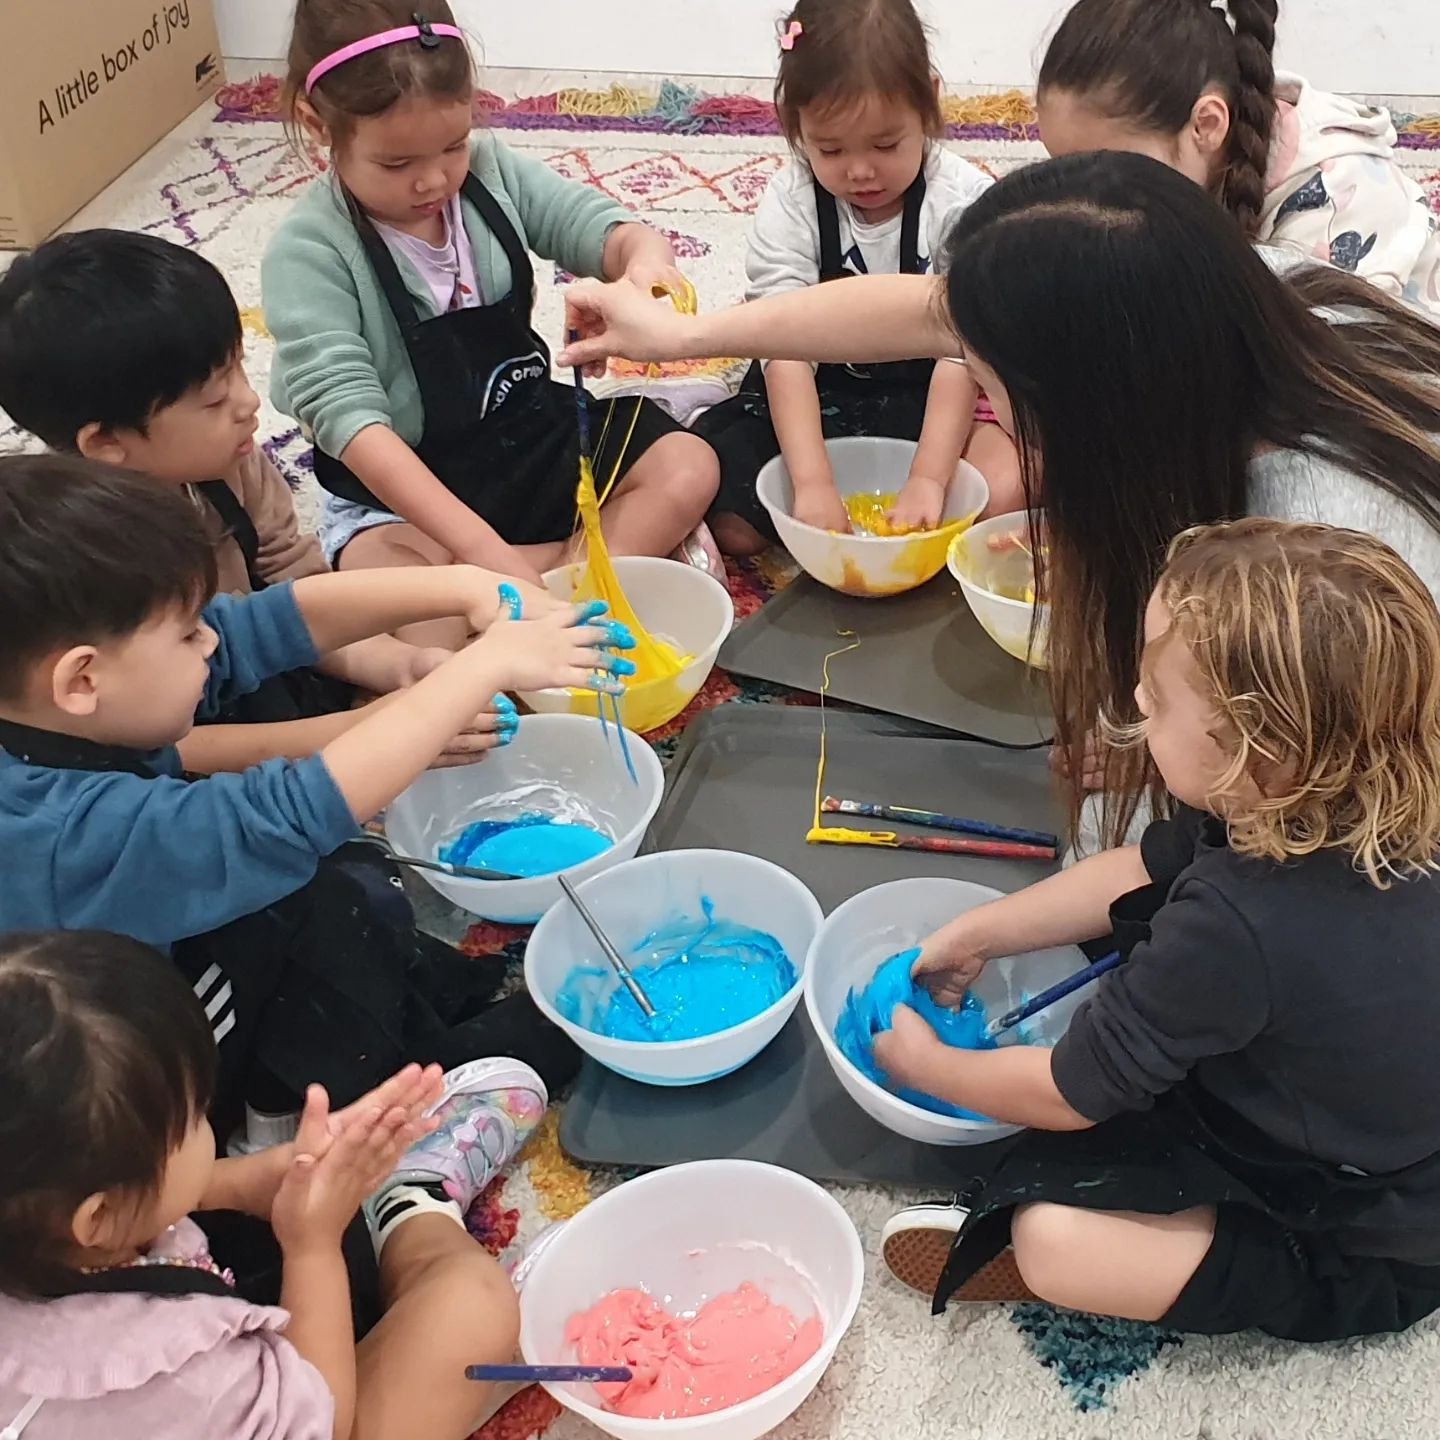 At our art studio for kids, we go beyond just creativity &ndash; our carefully crafted program makes learning super enjoyable while building skills that last a lifetime. Join us in fostering both fun and growth for your child!

www.alittlebitestudio.